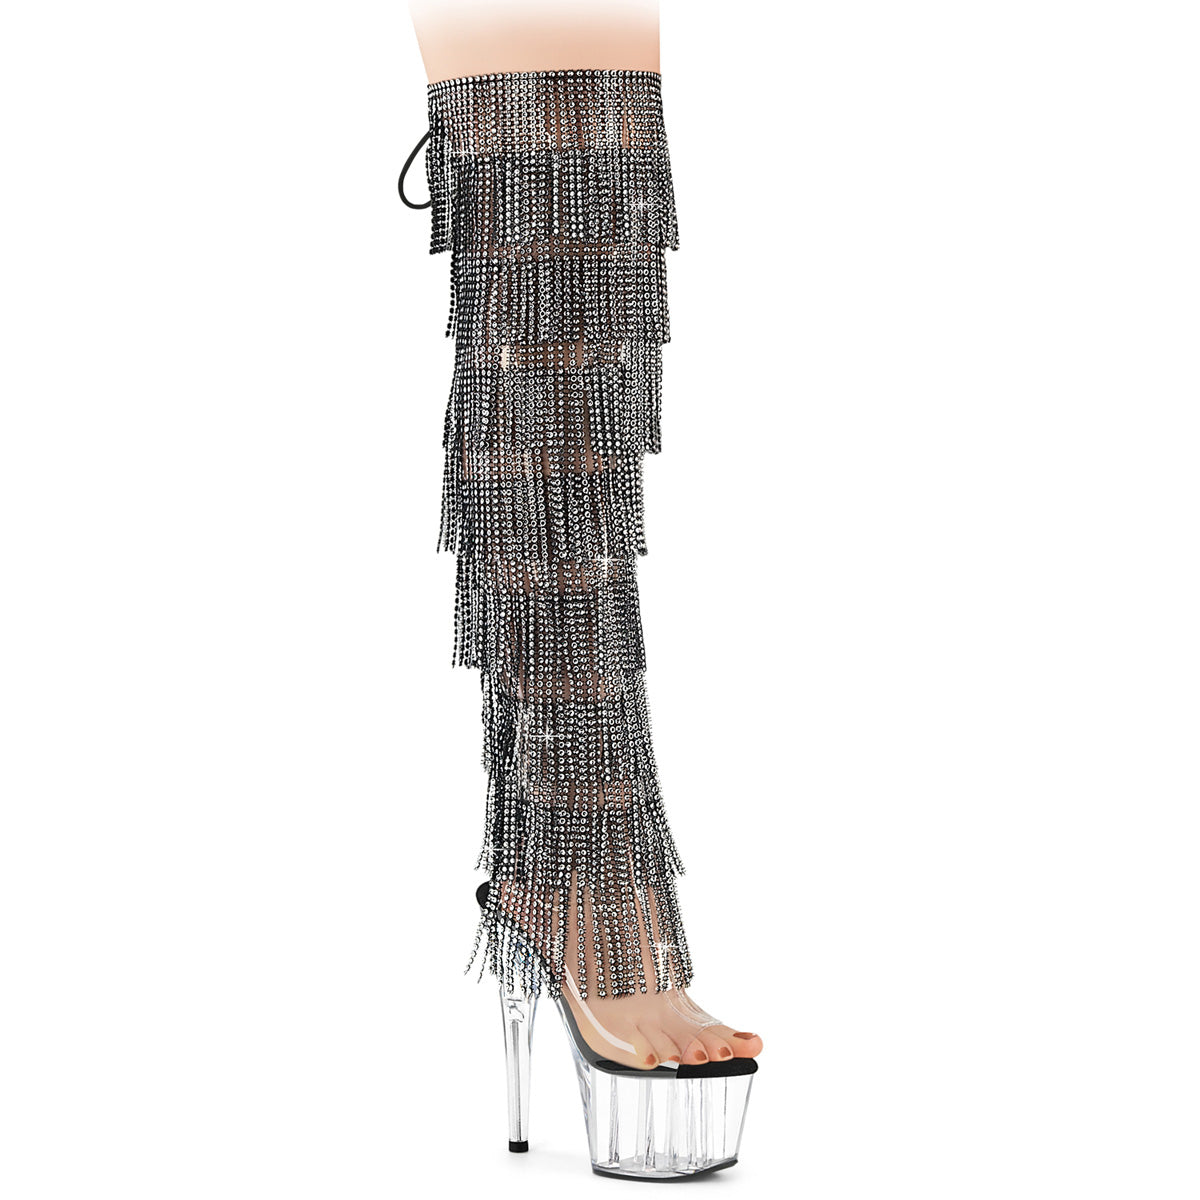 ADORE-3019C-RSF Pleaser 7 Inch Heel Black Bling Fringe Pole Dancing Thigh High Boots